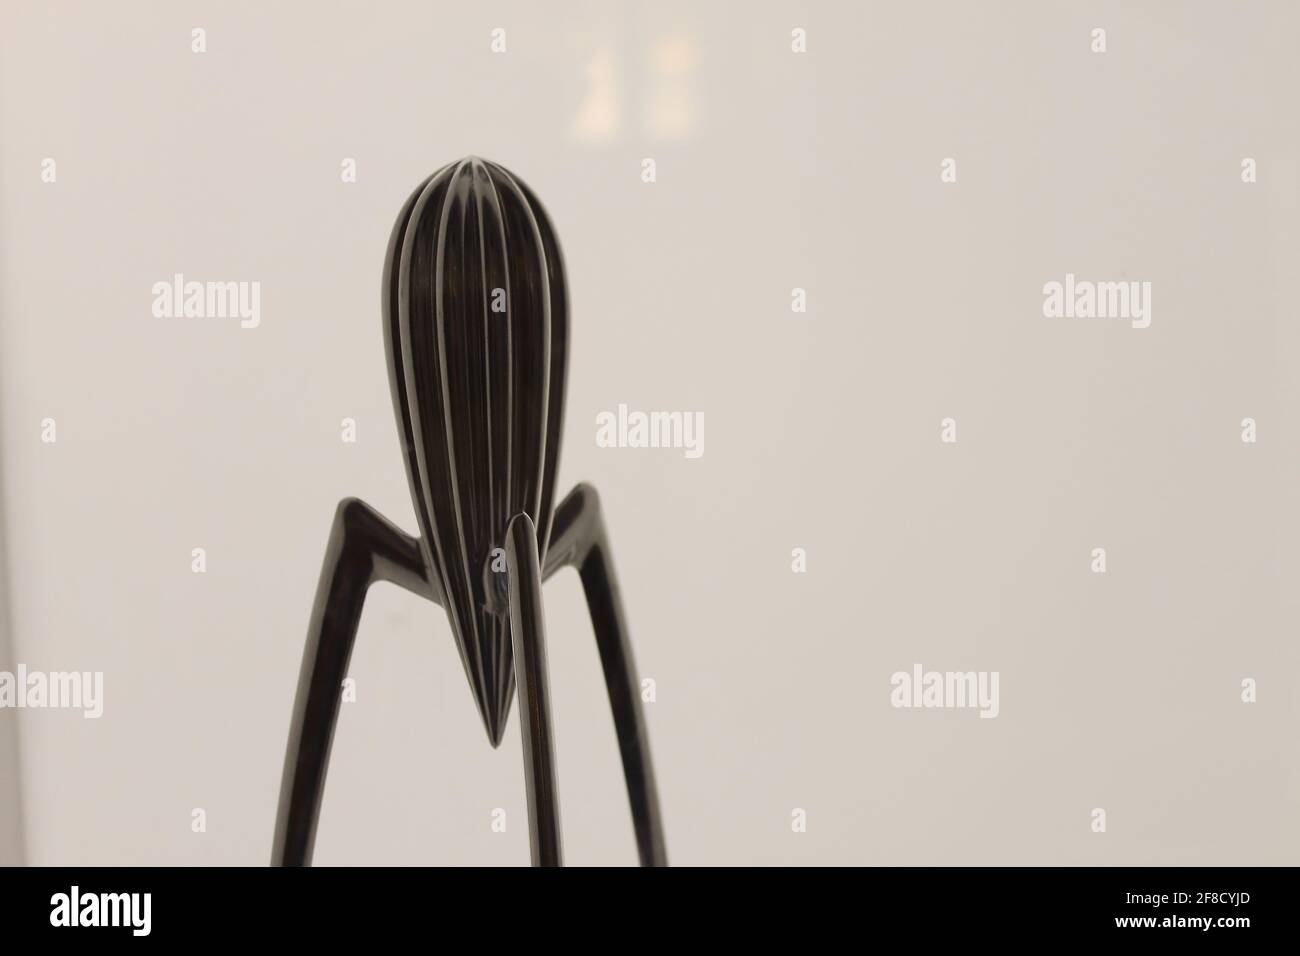 Juicy Salif Juicer by P. Stark, 2014.Produced by Alessi Stock Photo